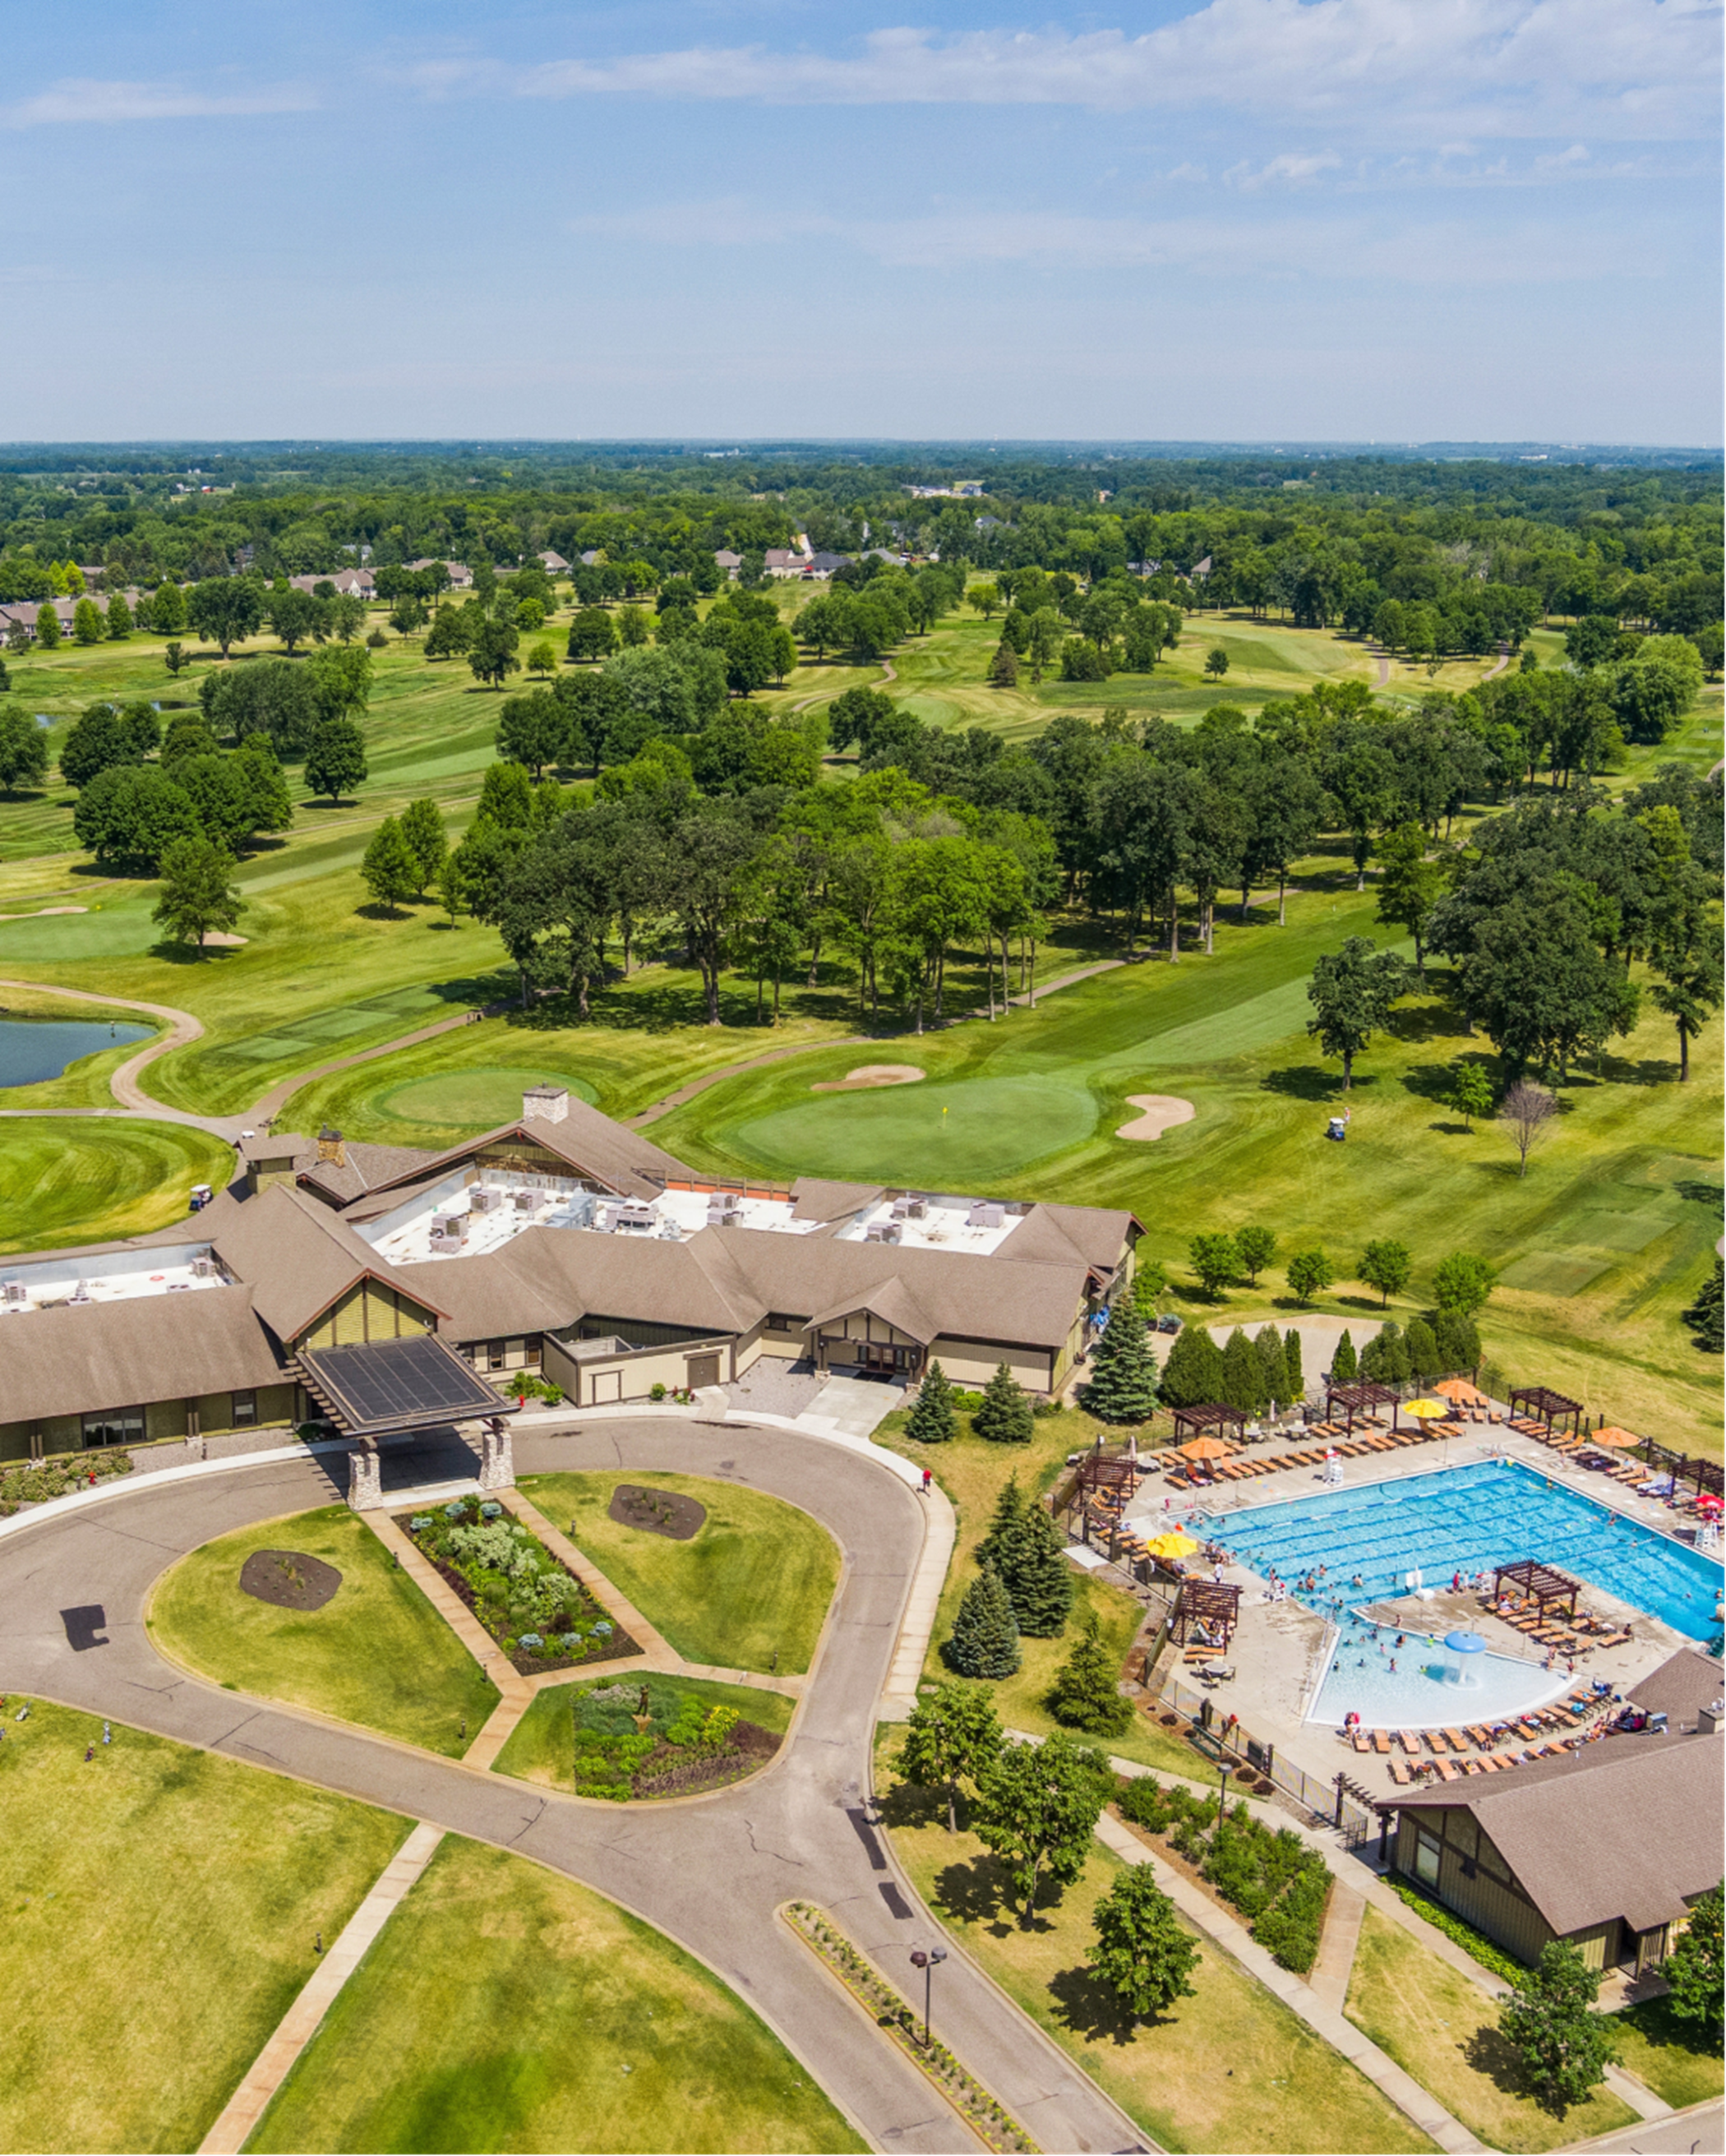 Golf and country club aerial